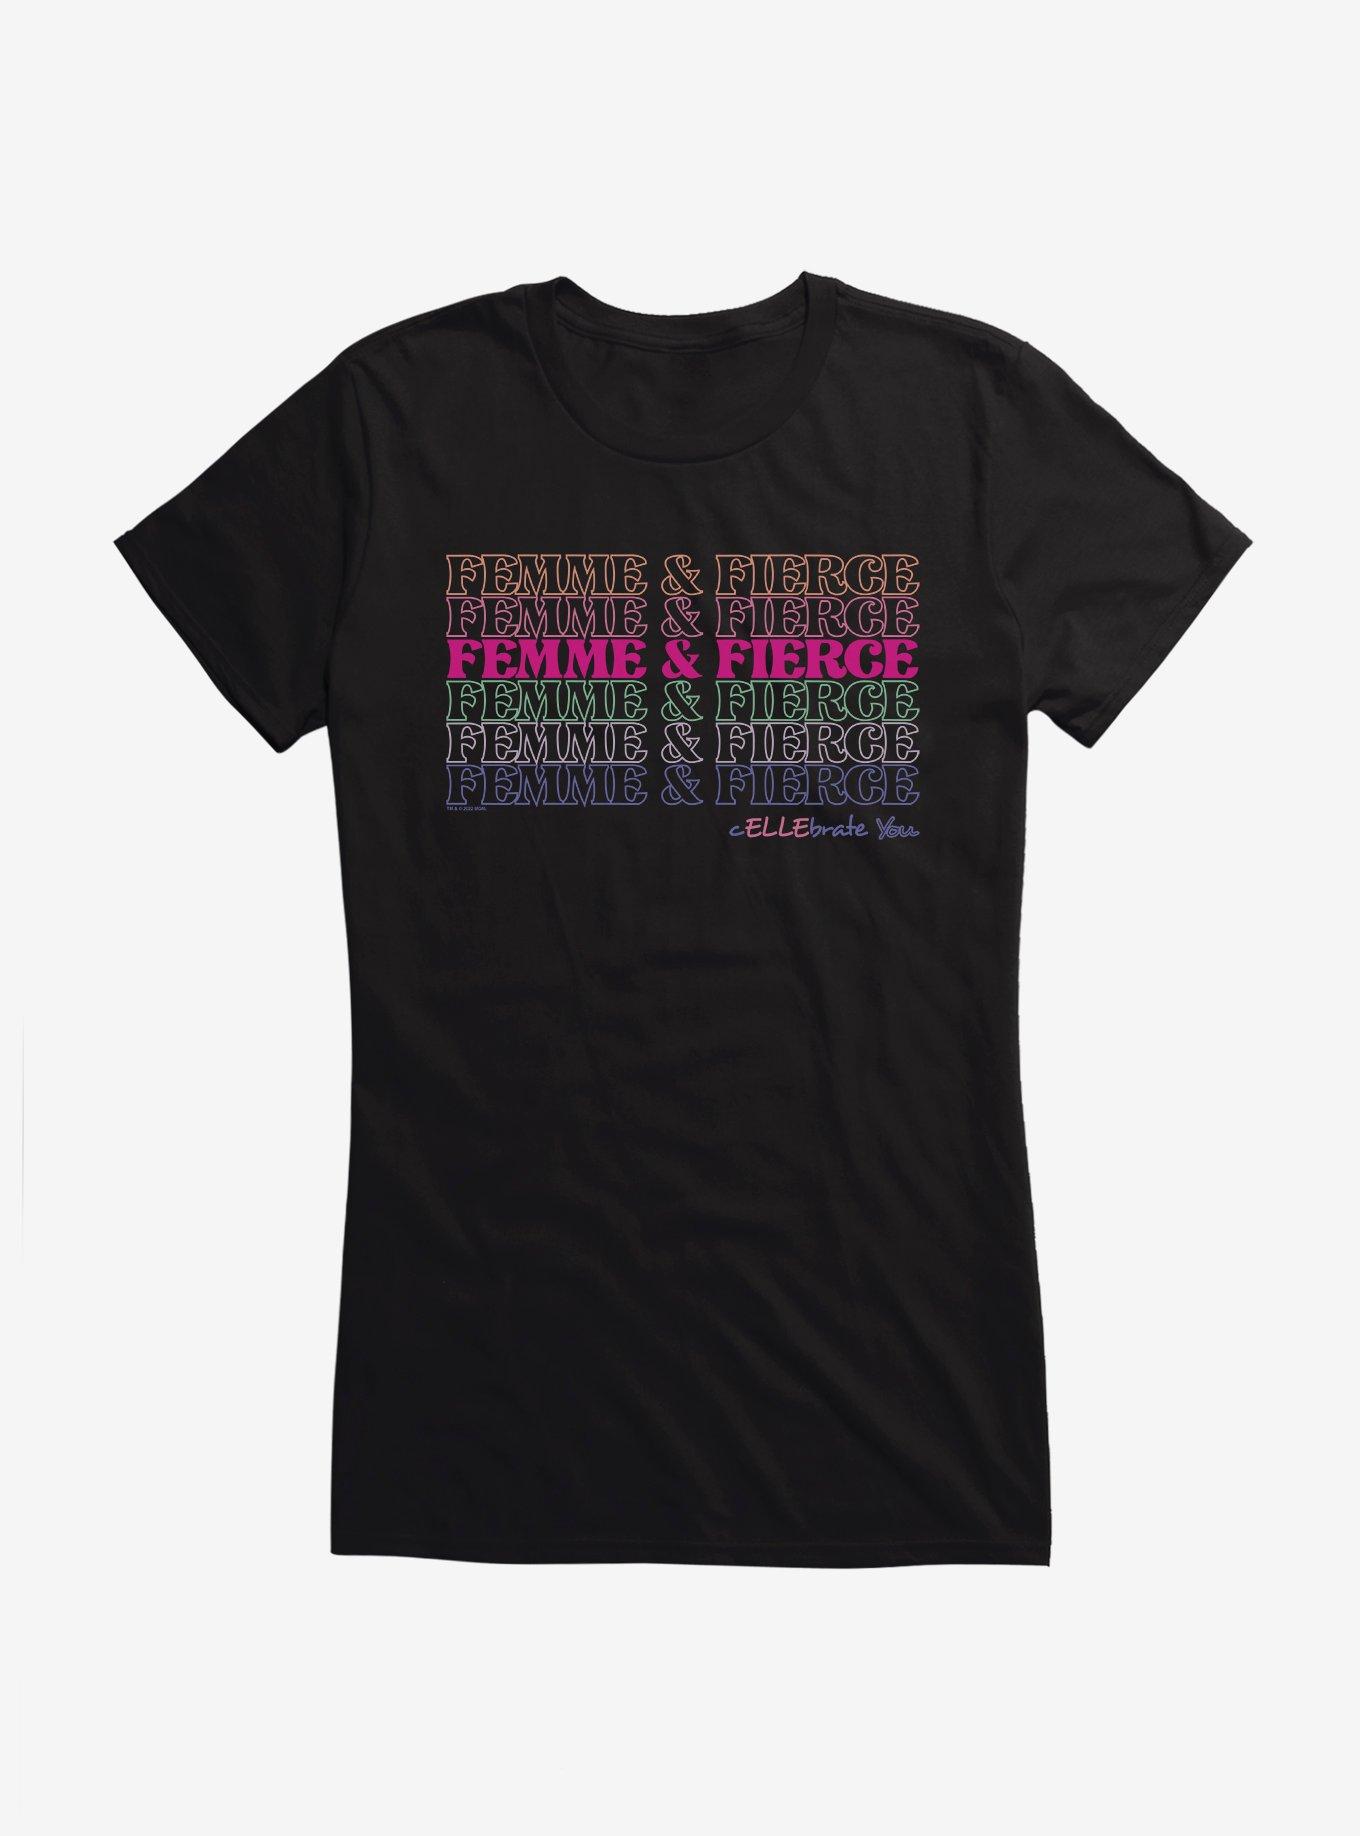 Legally Blonde Femme And Fierce Stack Girls T-Shirt